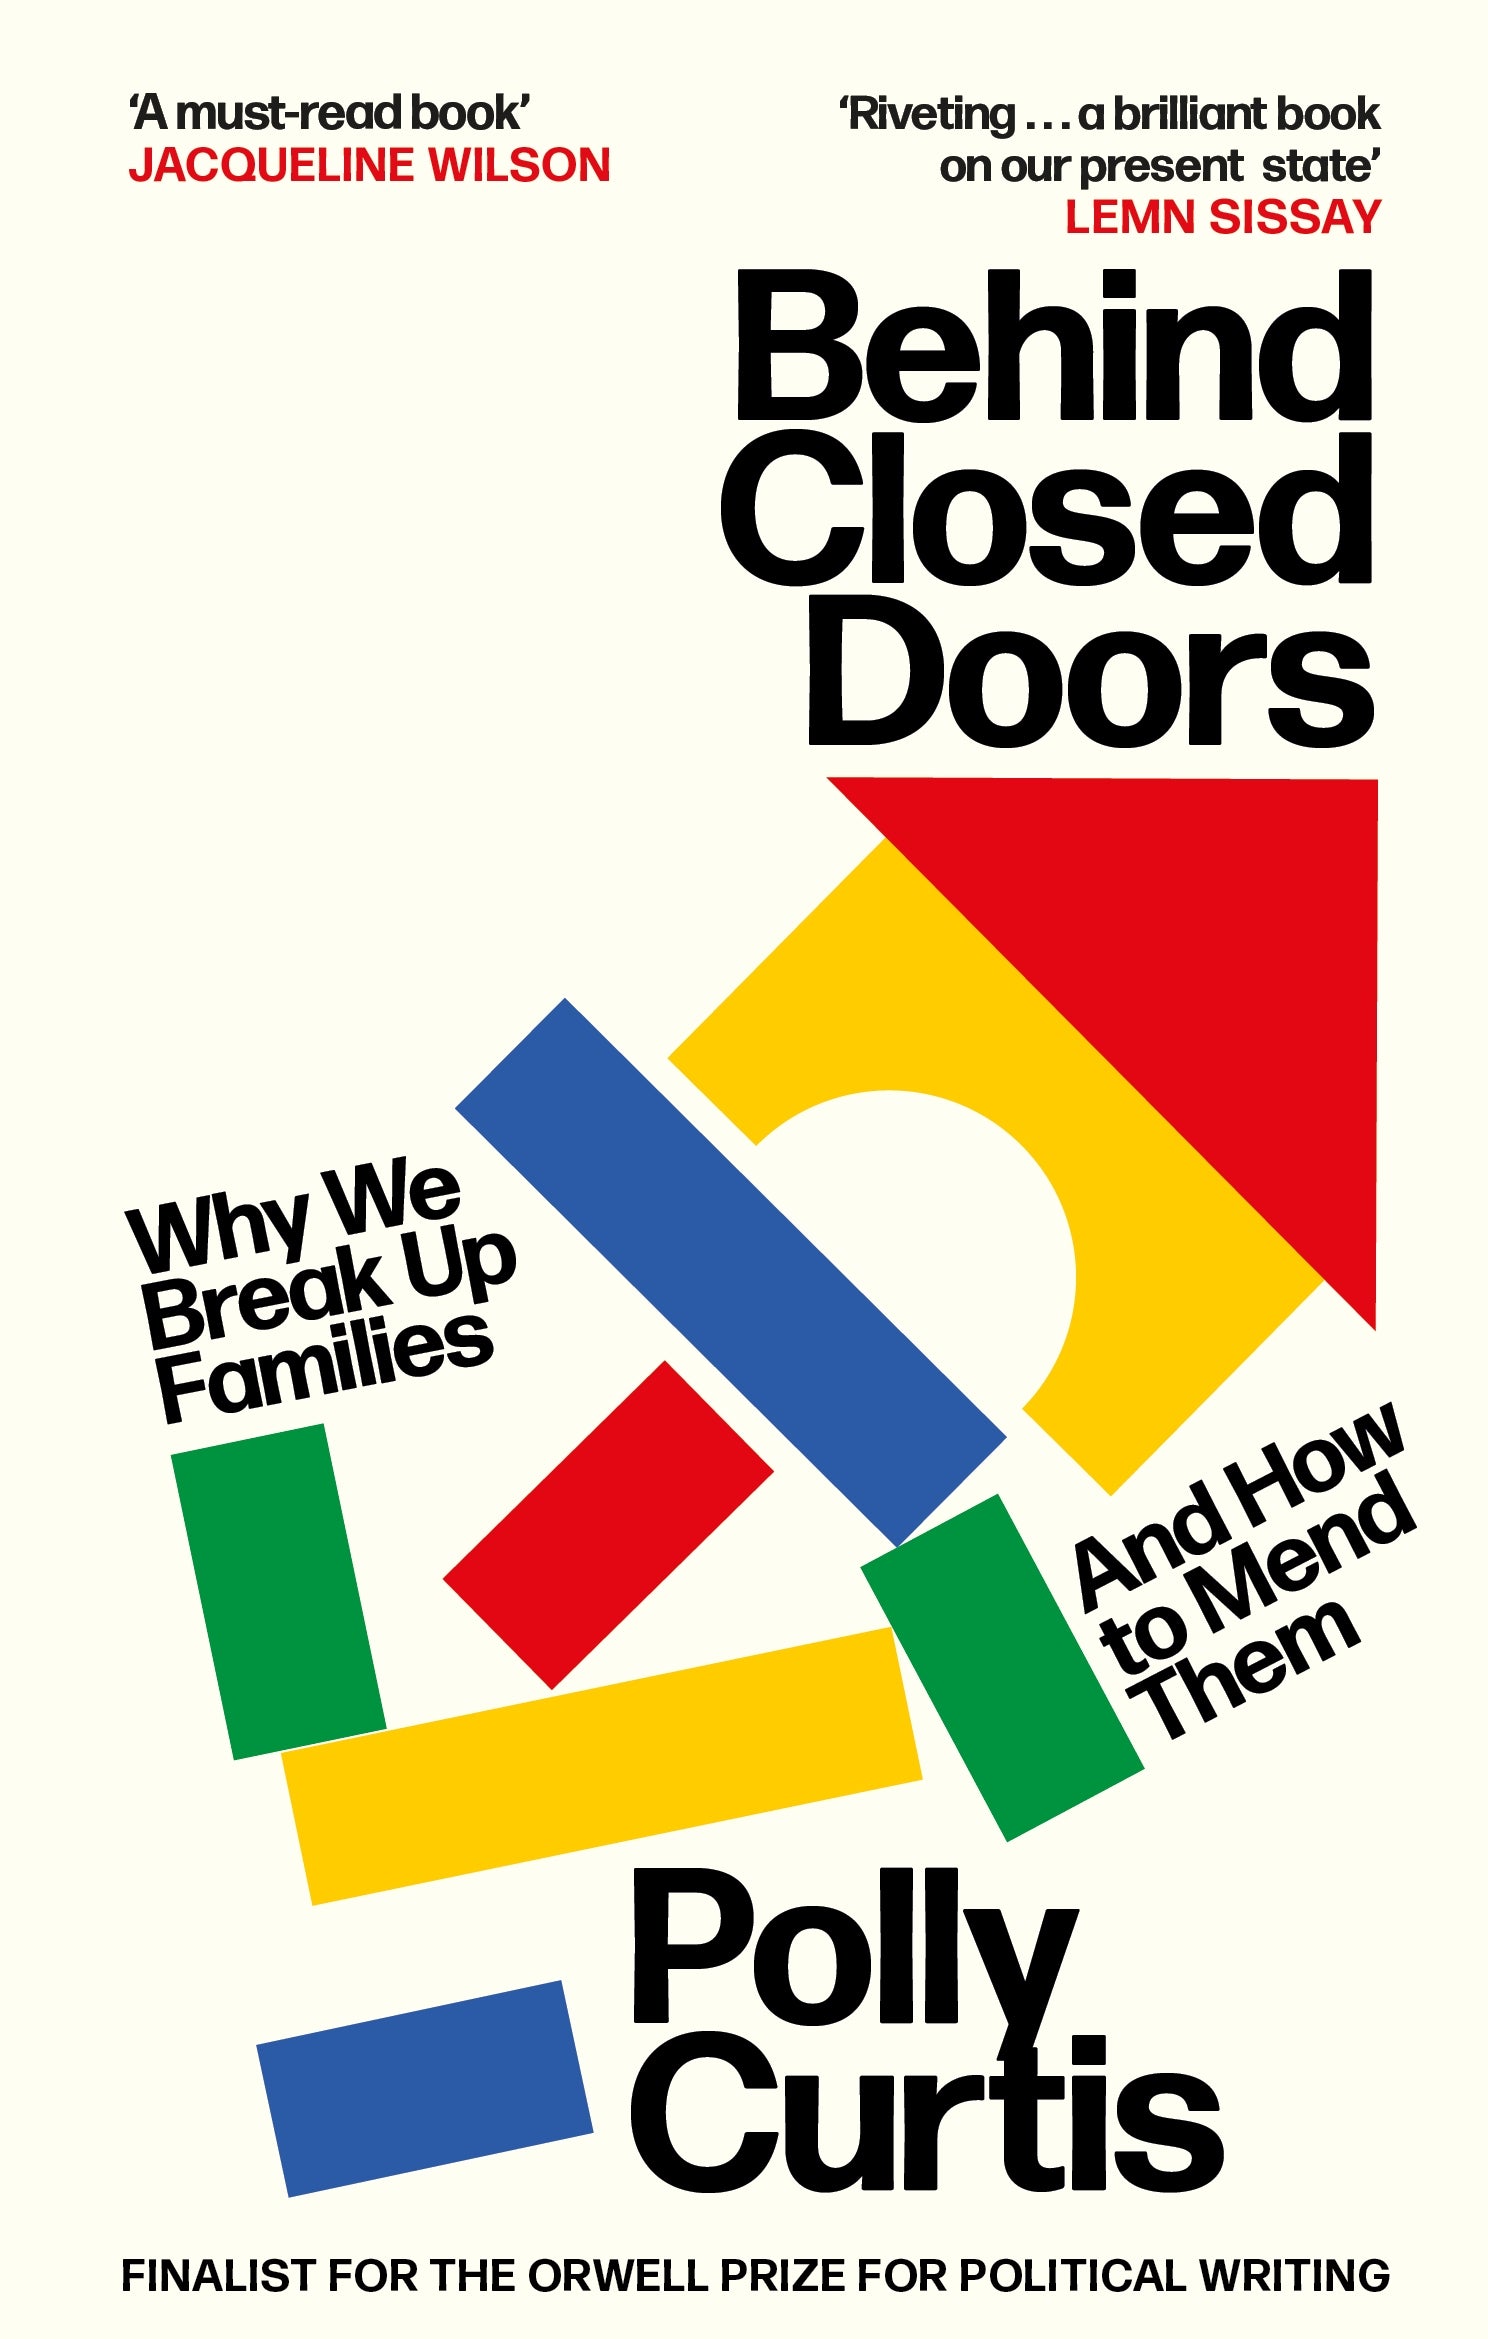 Behind Closed Doors: SHORTLISTED FOR THE ORWELL PRIZE FOR POLITICAL WRITING by Polly Curtis